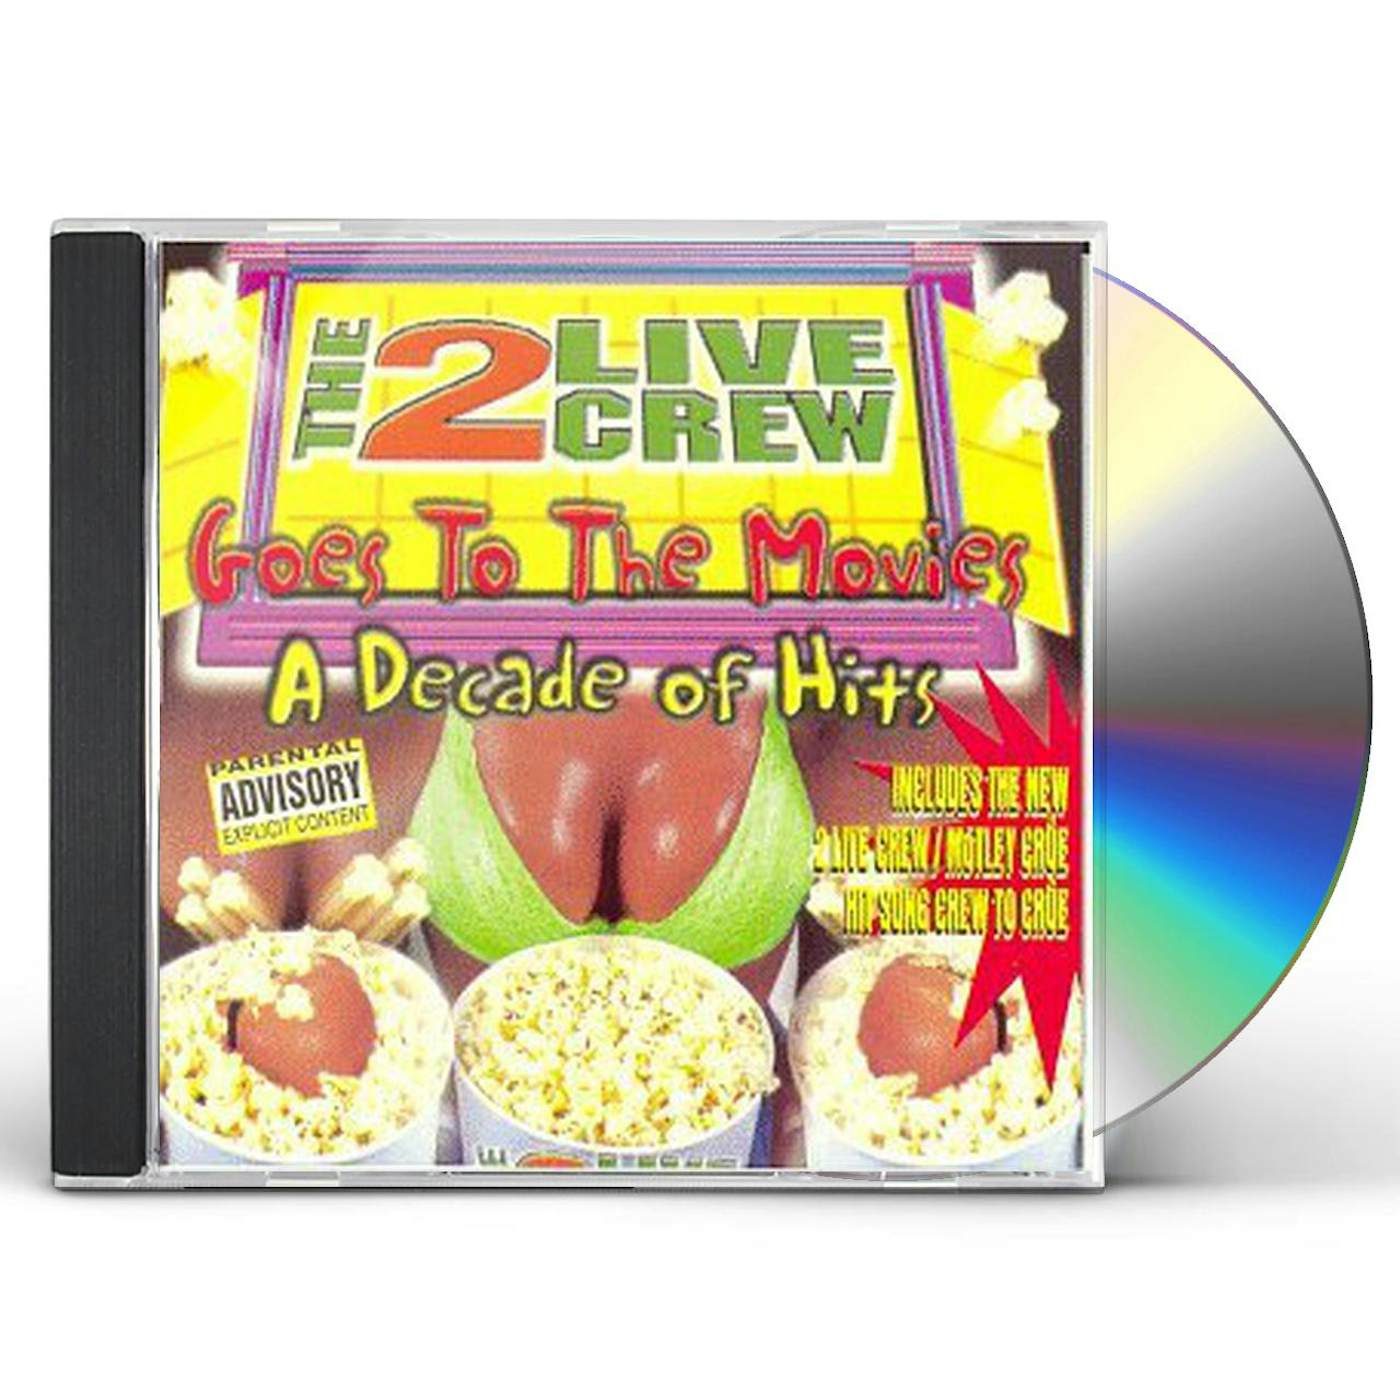 2 LIVE CREW GOES TO THE MOVIES: DECADE OF HITS CD